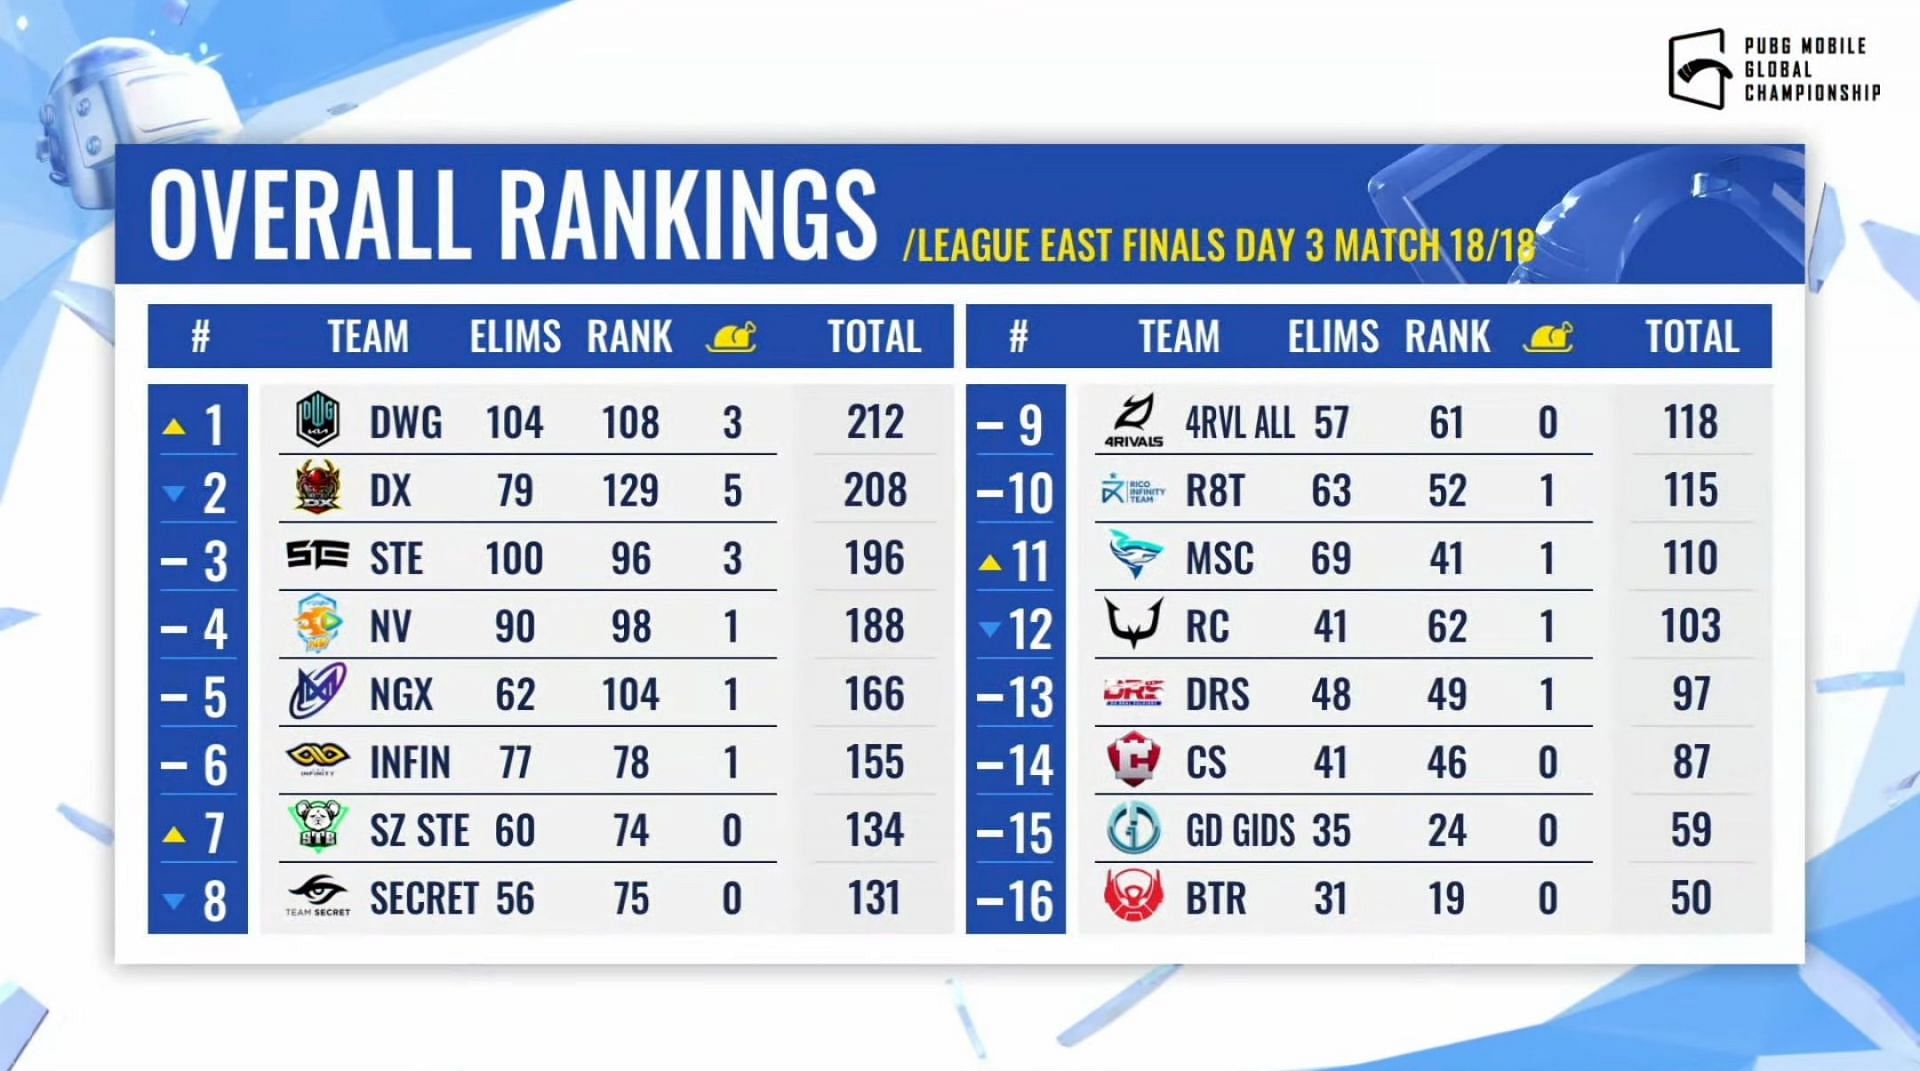 PMGC League East Finals overall ranking (Image via PUBG Mobile)